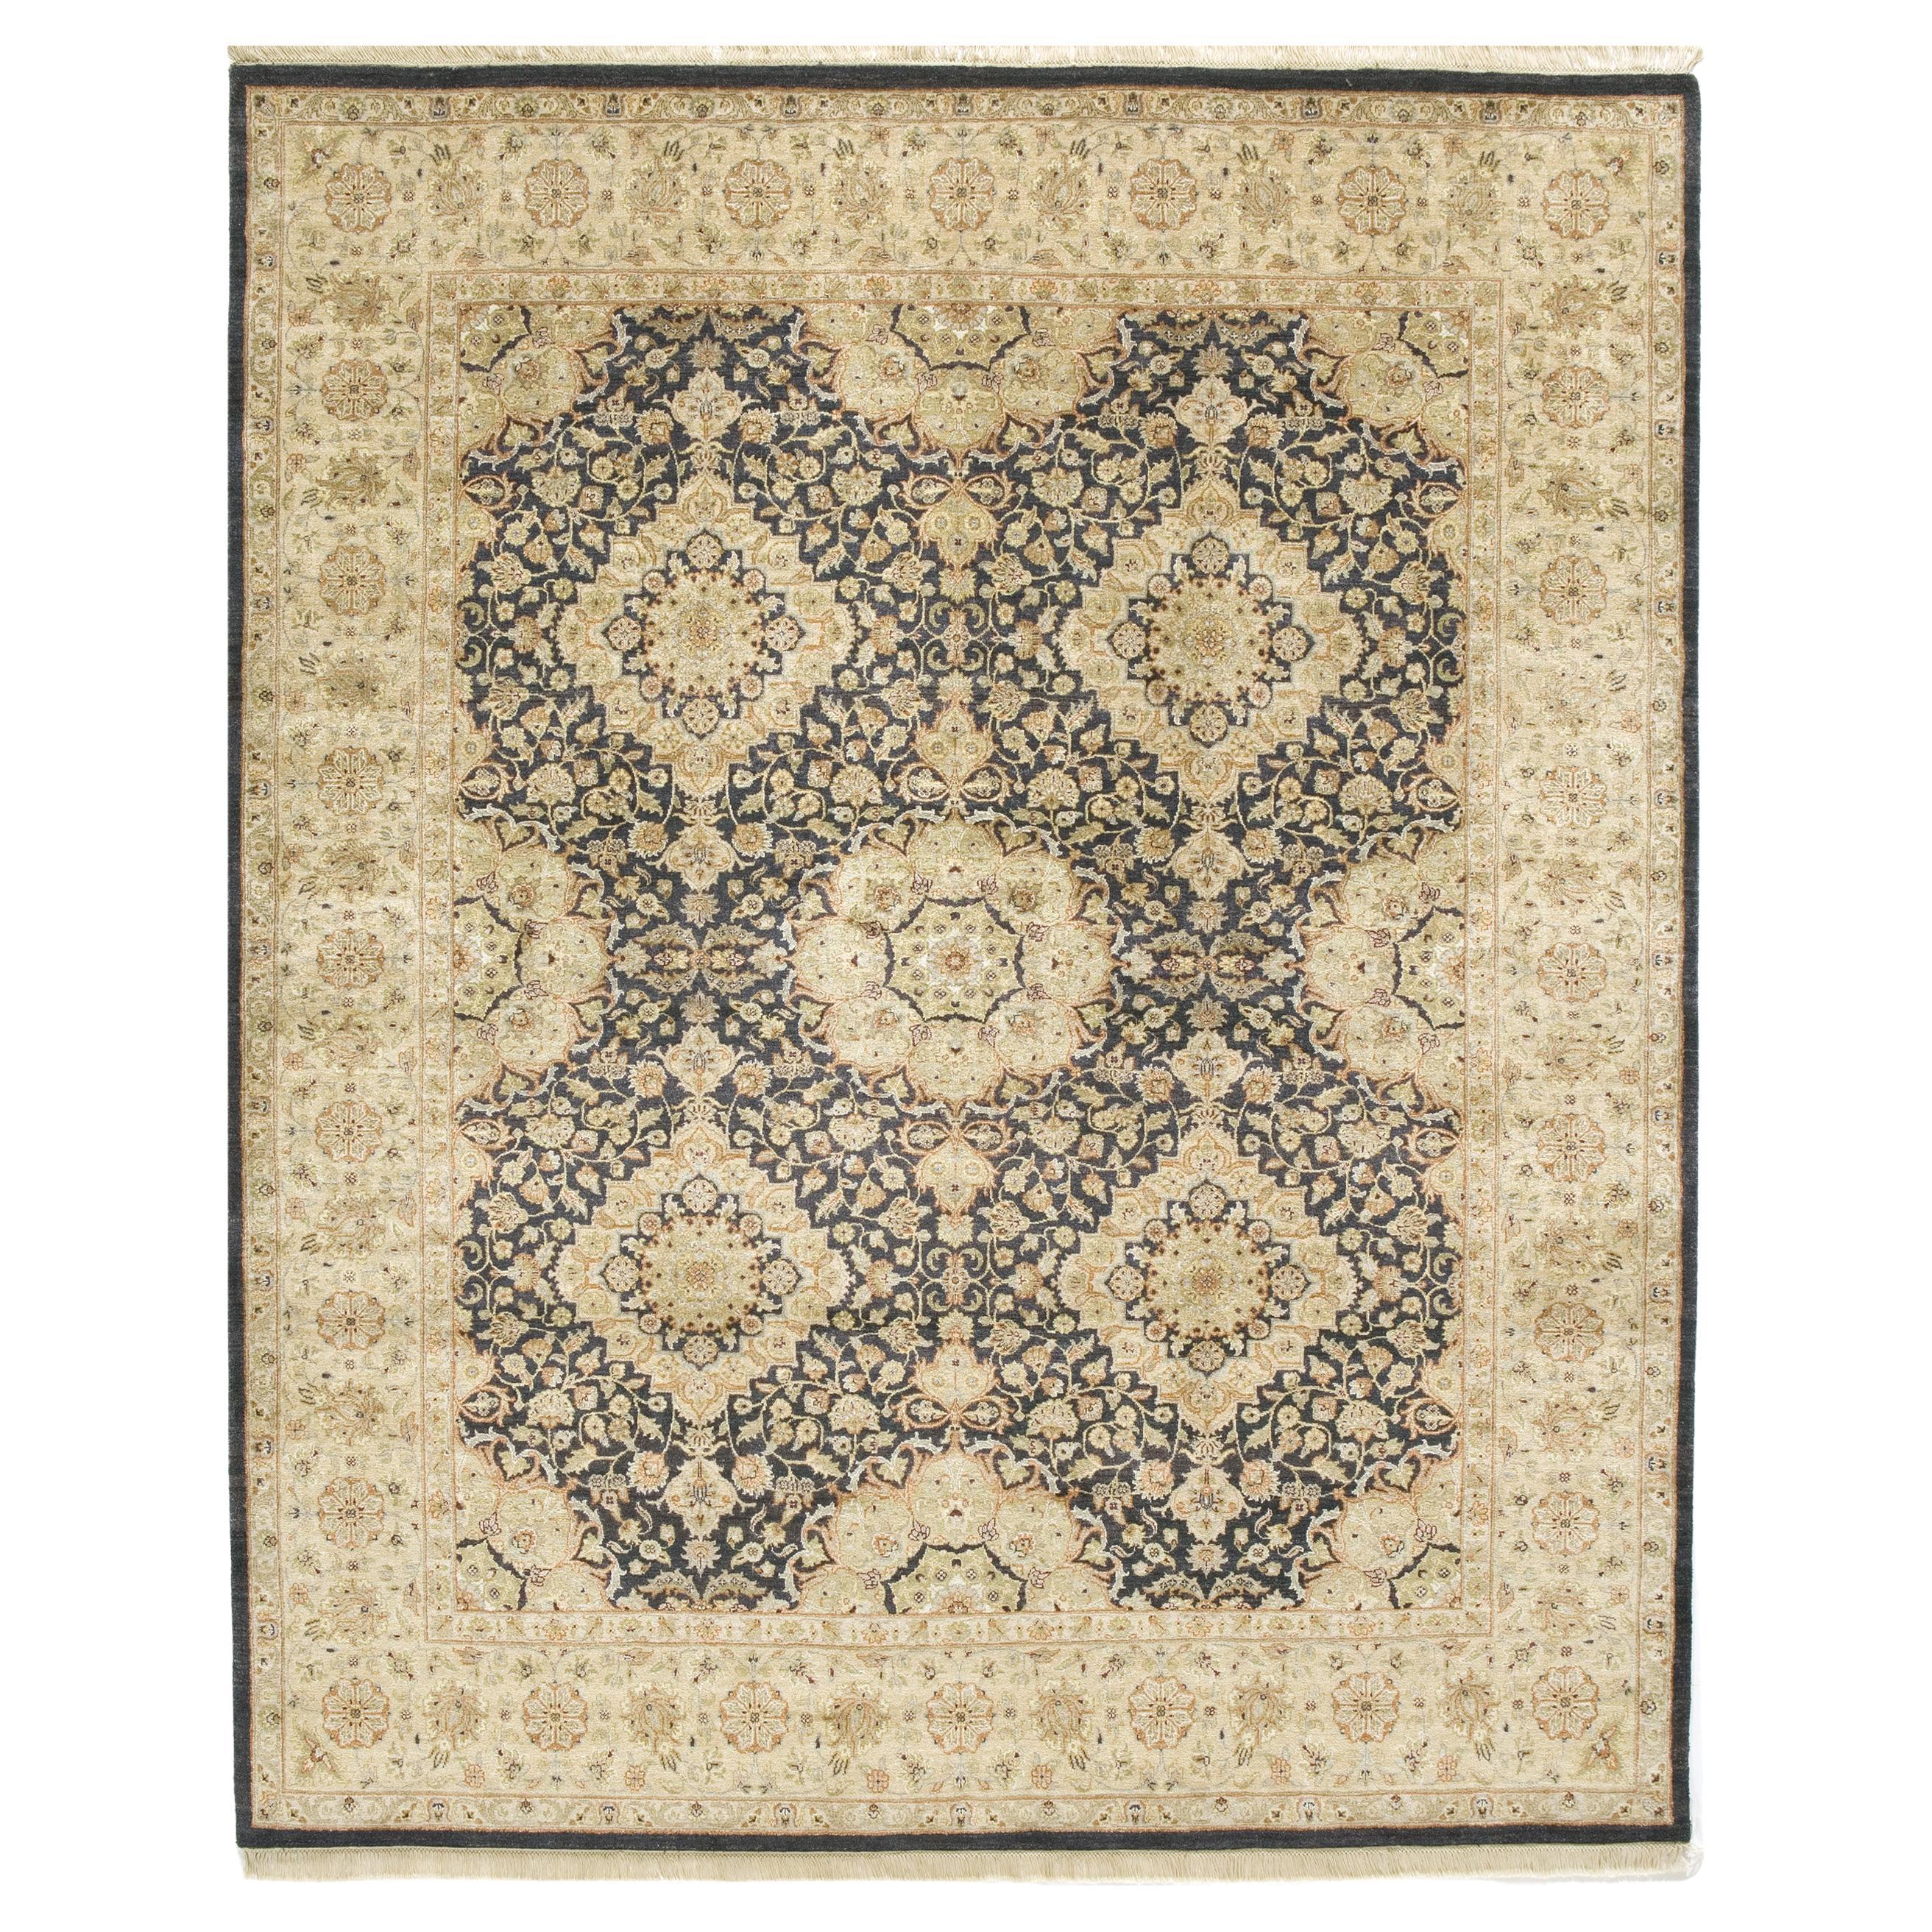 Luxury Traditional Hand-Knotted Kirman Black and Gold 12x15 Rug